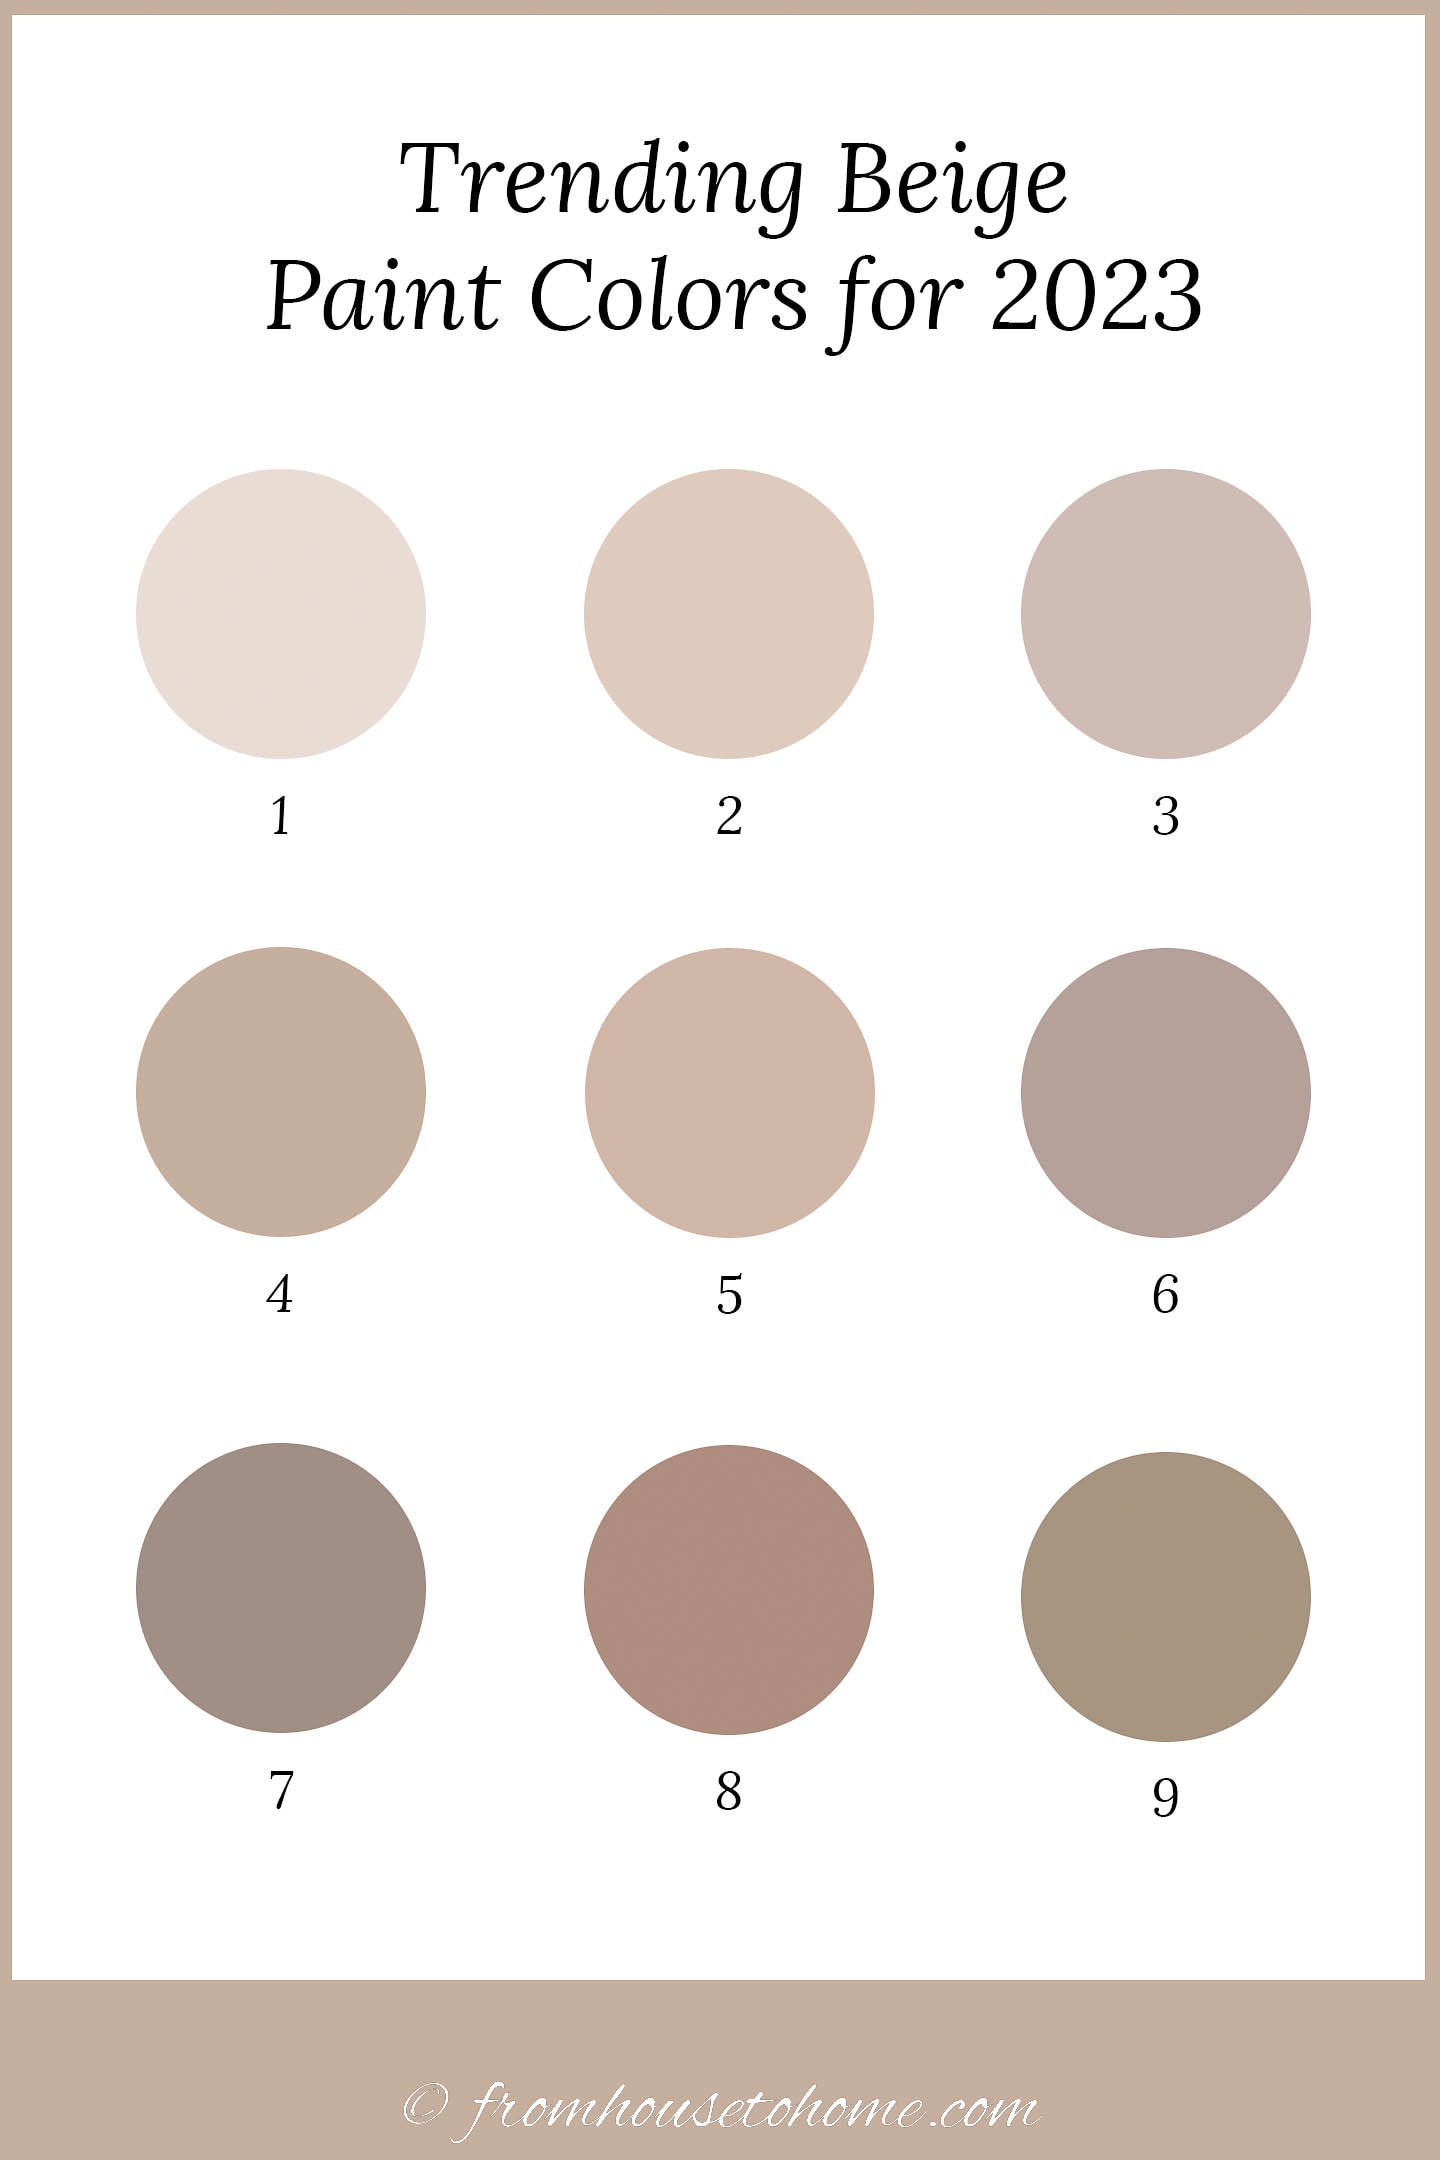 9 swatches of trending beige paint colors